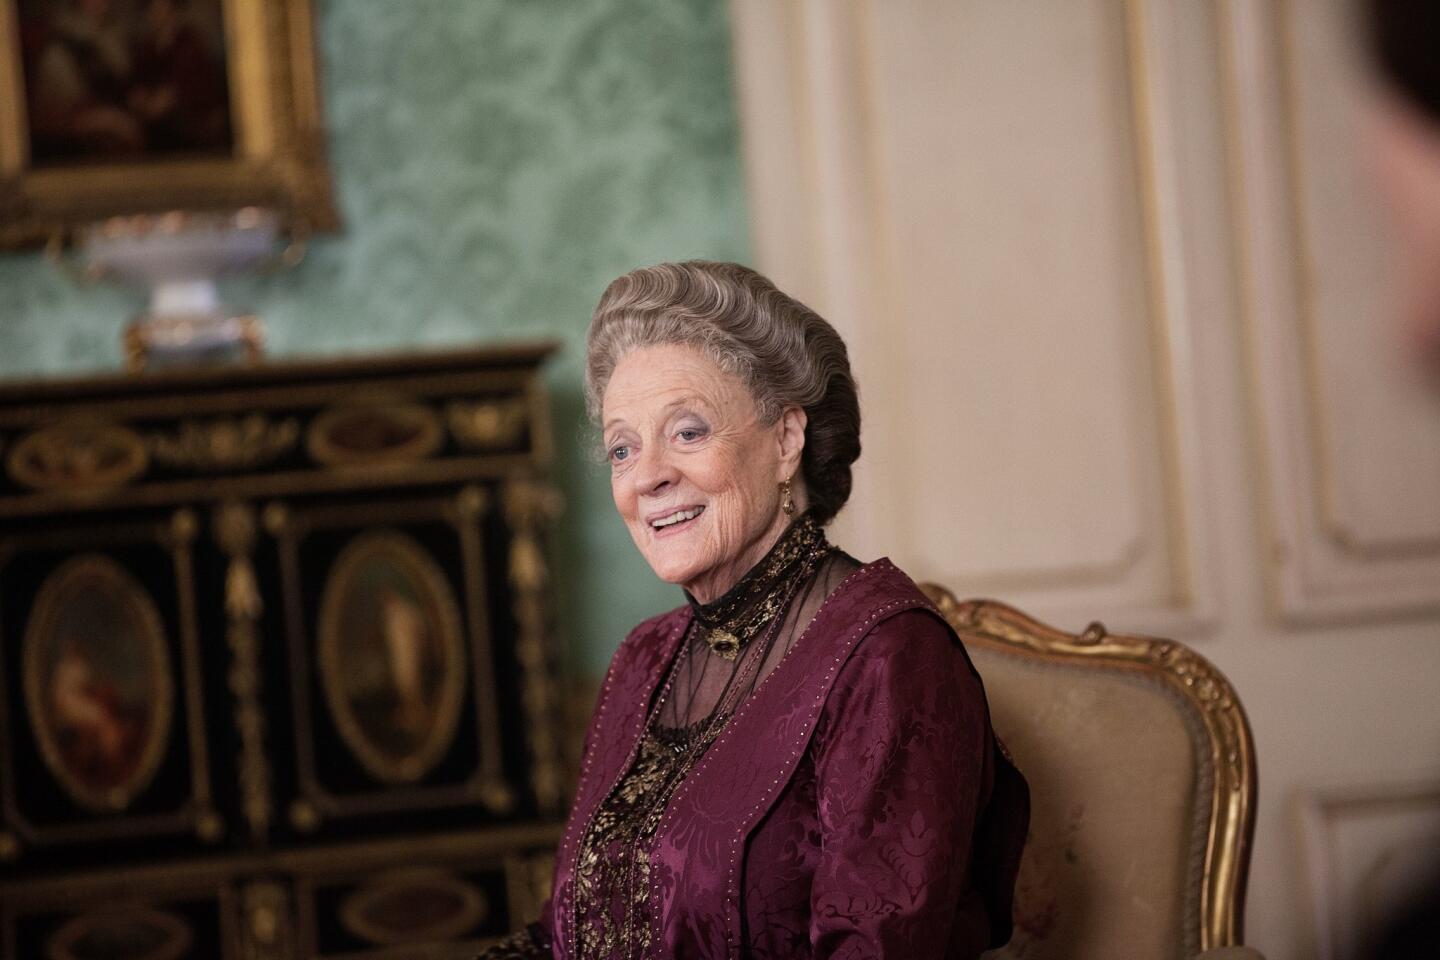 Maggie Smith | 'Downton Abbey' | Supporting actress in a drama